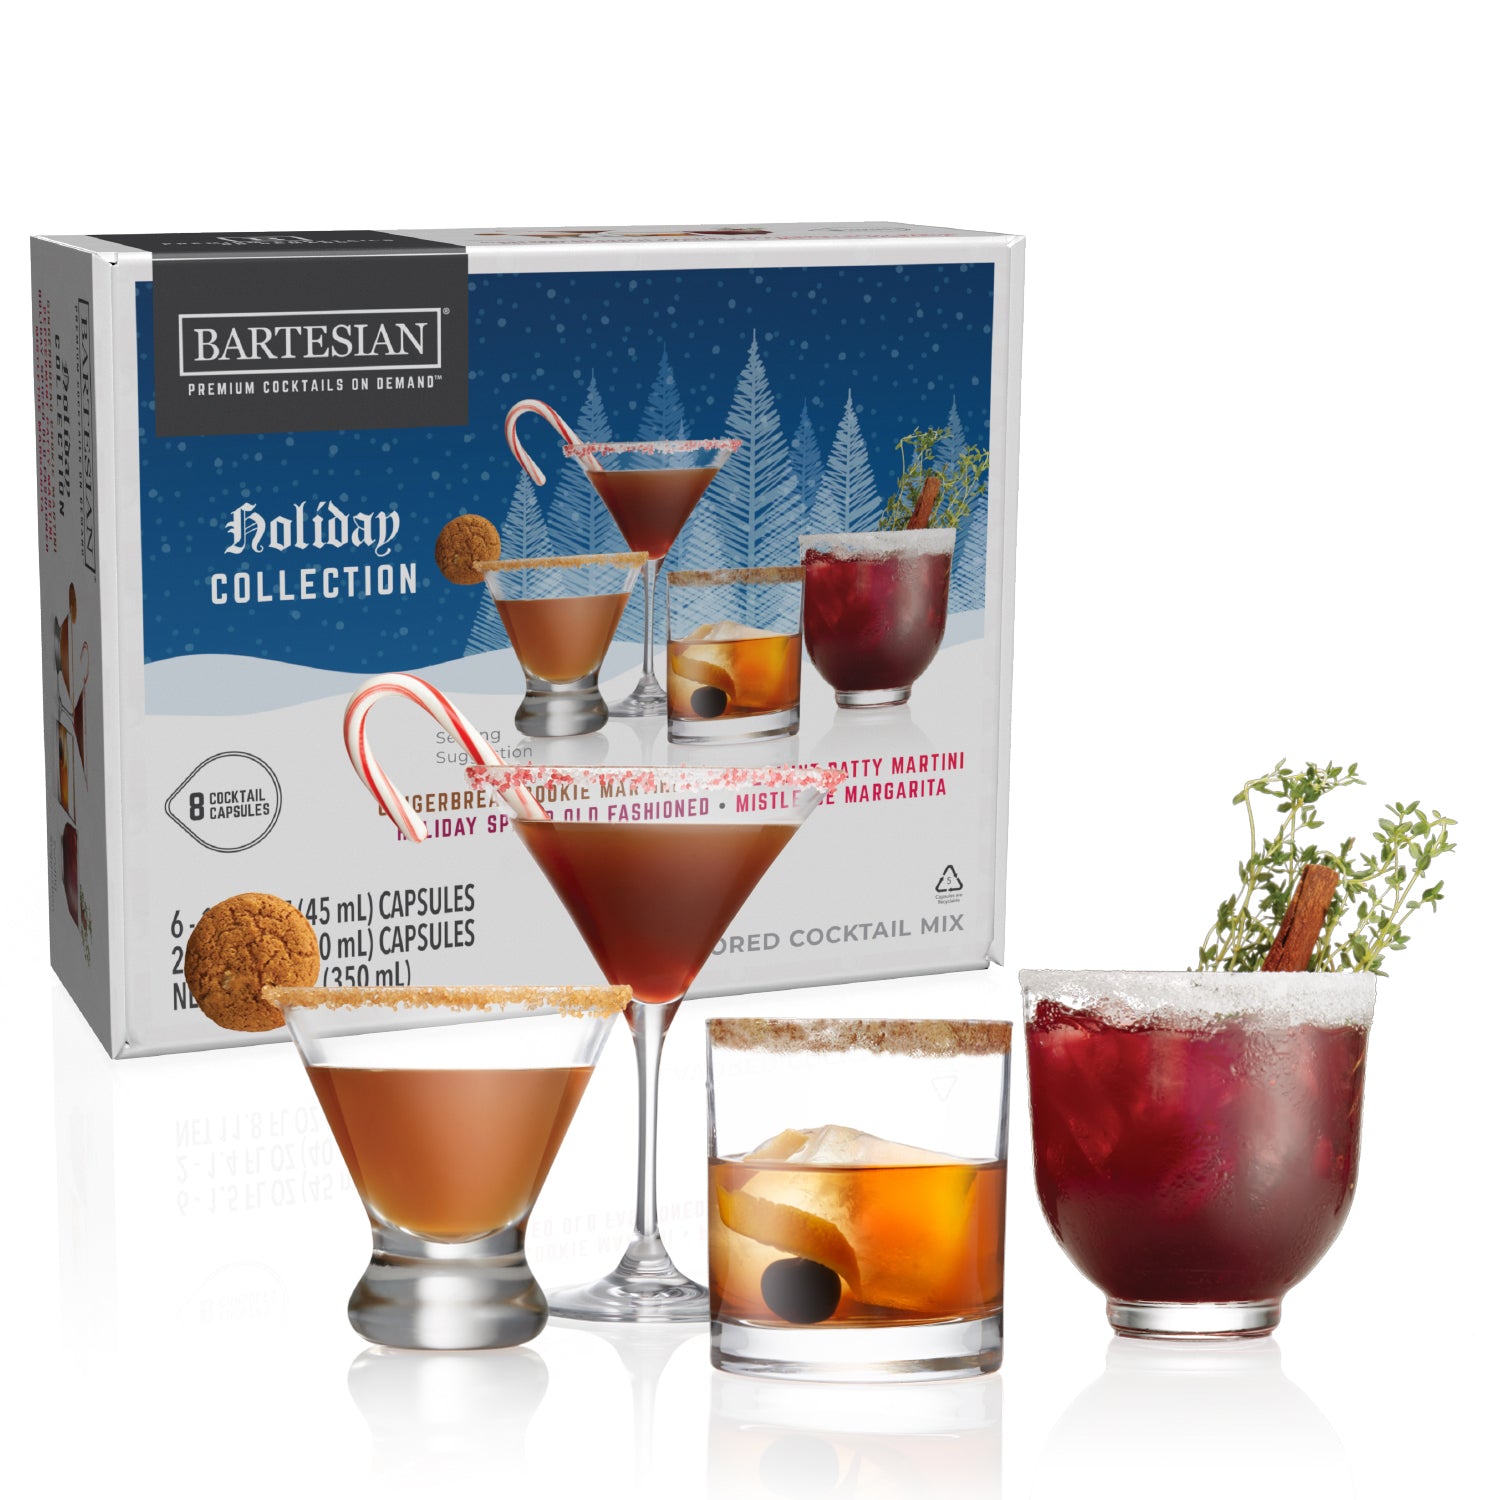 Bartesian Old Fashioned Cocktail Mix Capsules 6-pack